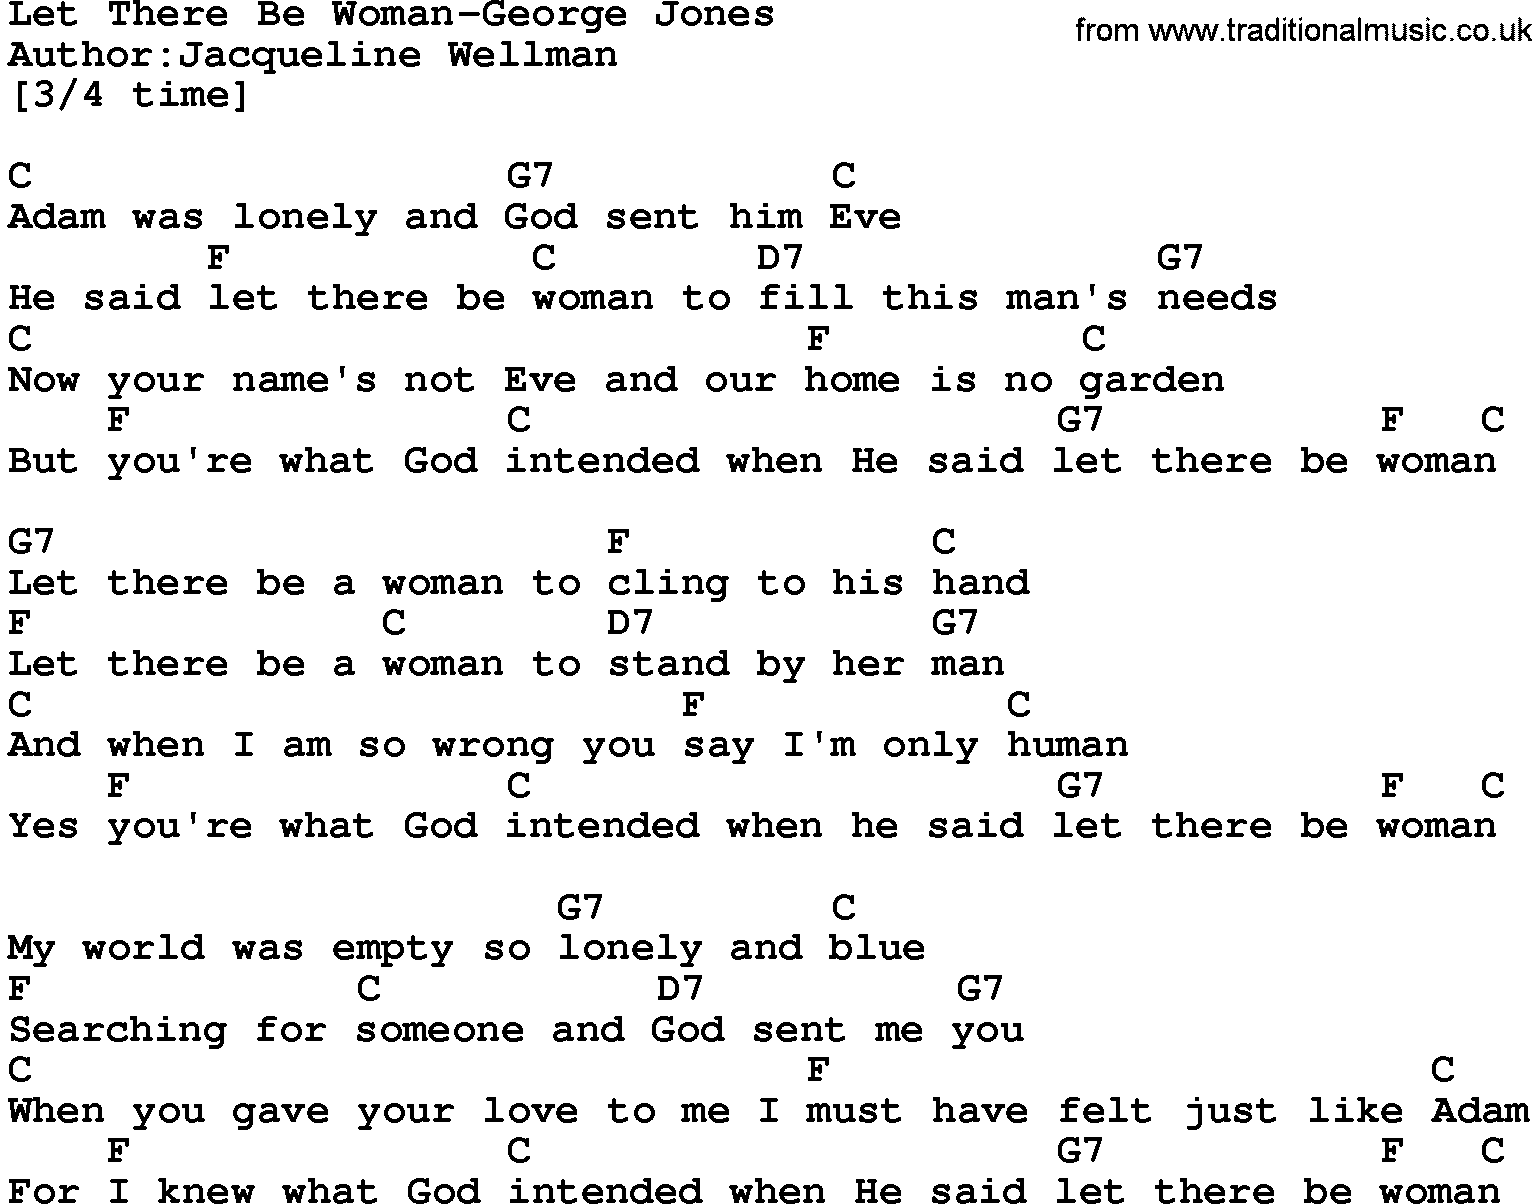 Country music song: Let There Be Woman-George Jones lyrics and chords